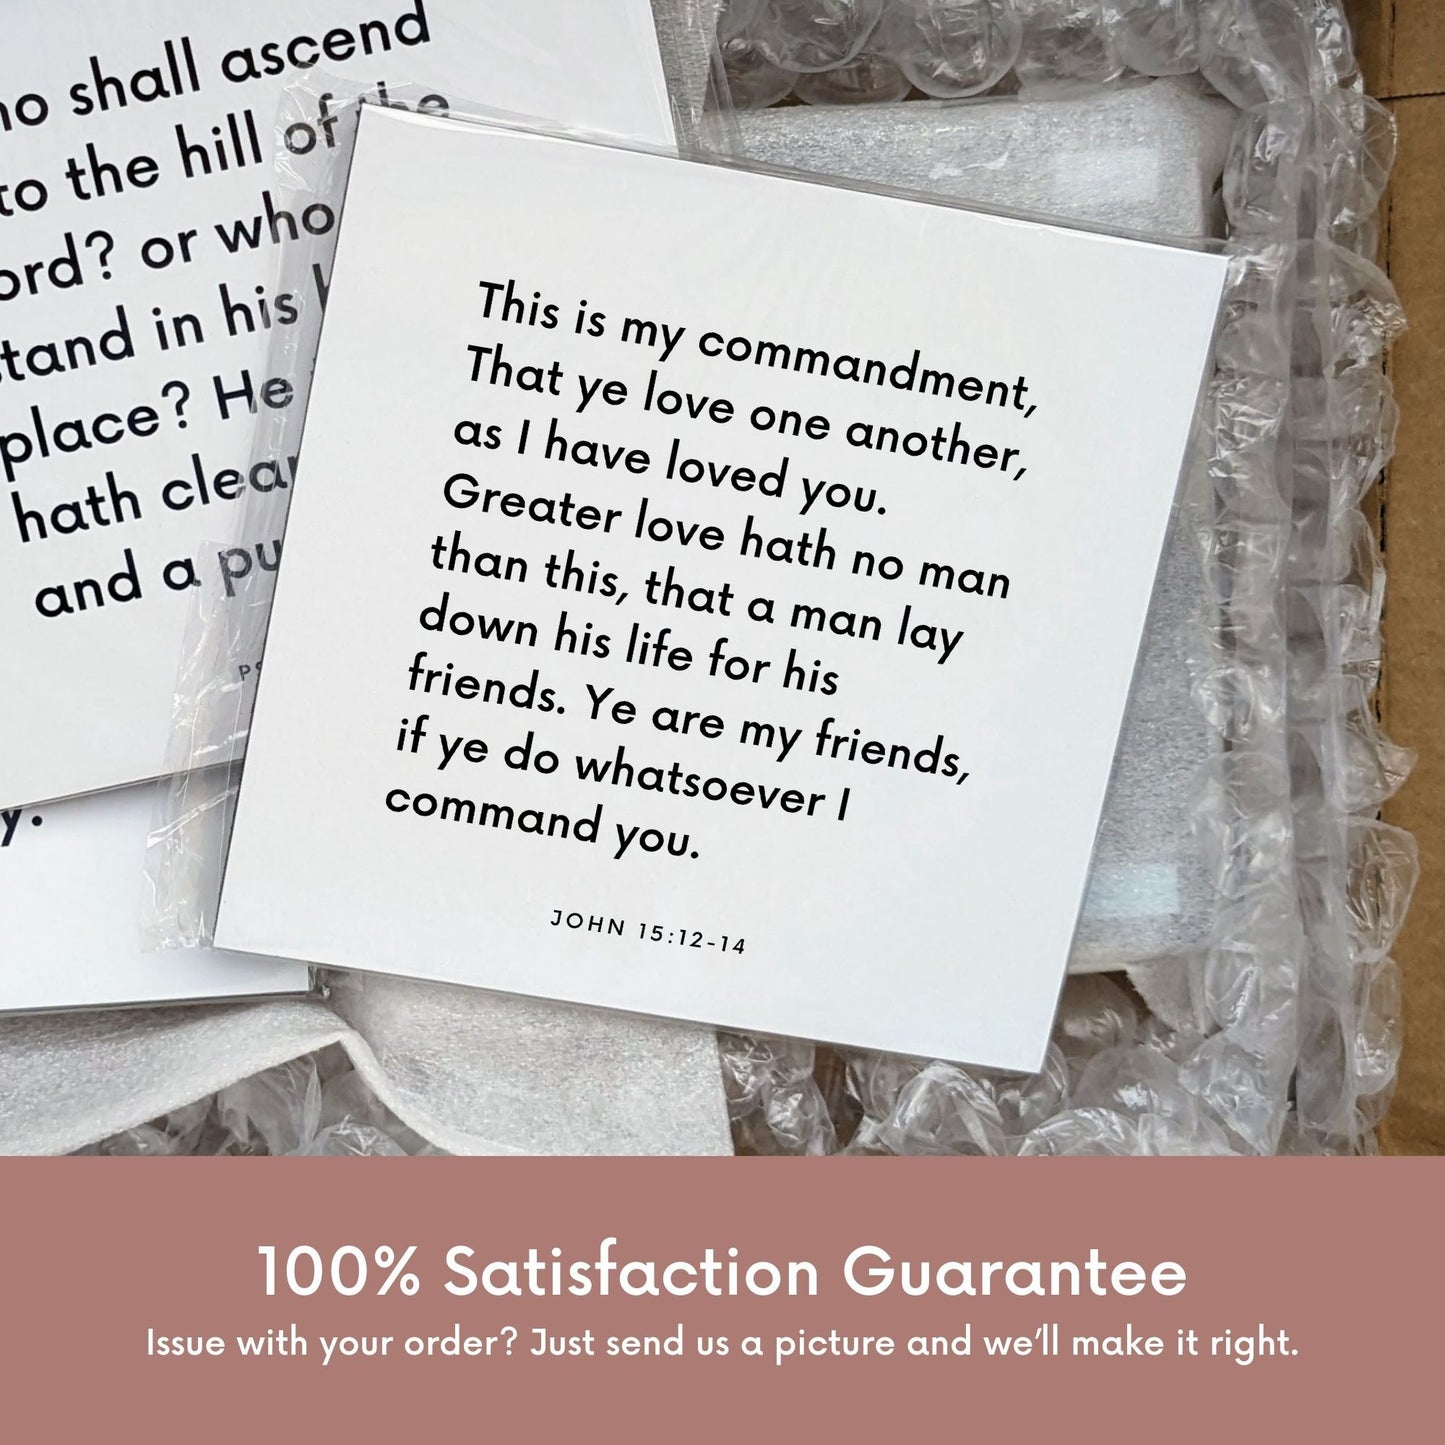 Shipping materials for scripture tile of John 15:12-14 - "This is my commandment, That ye love one another"